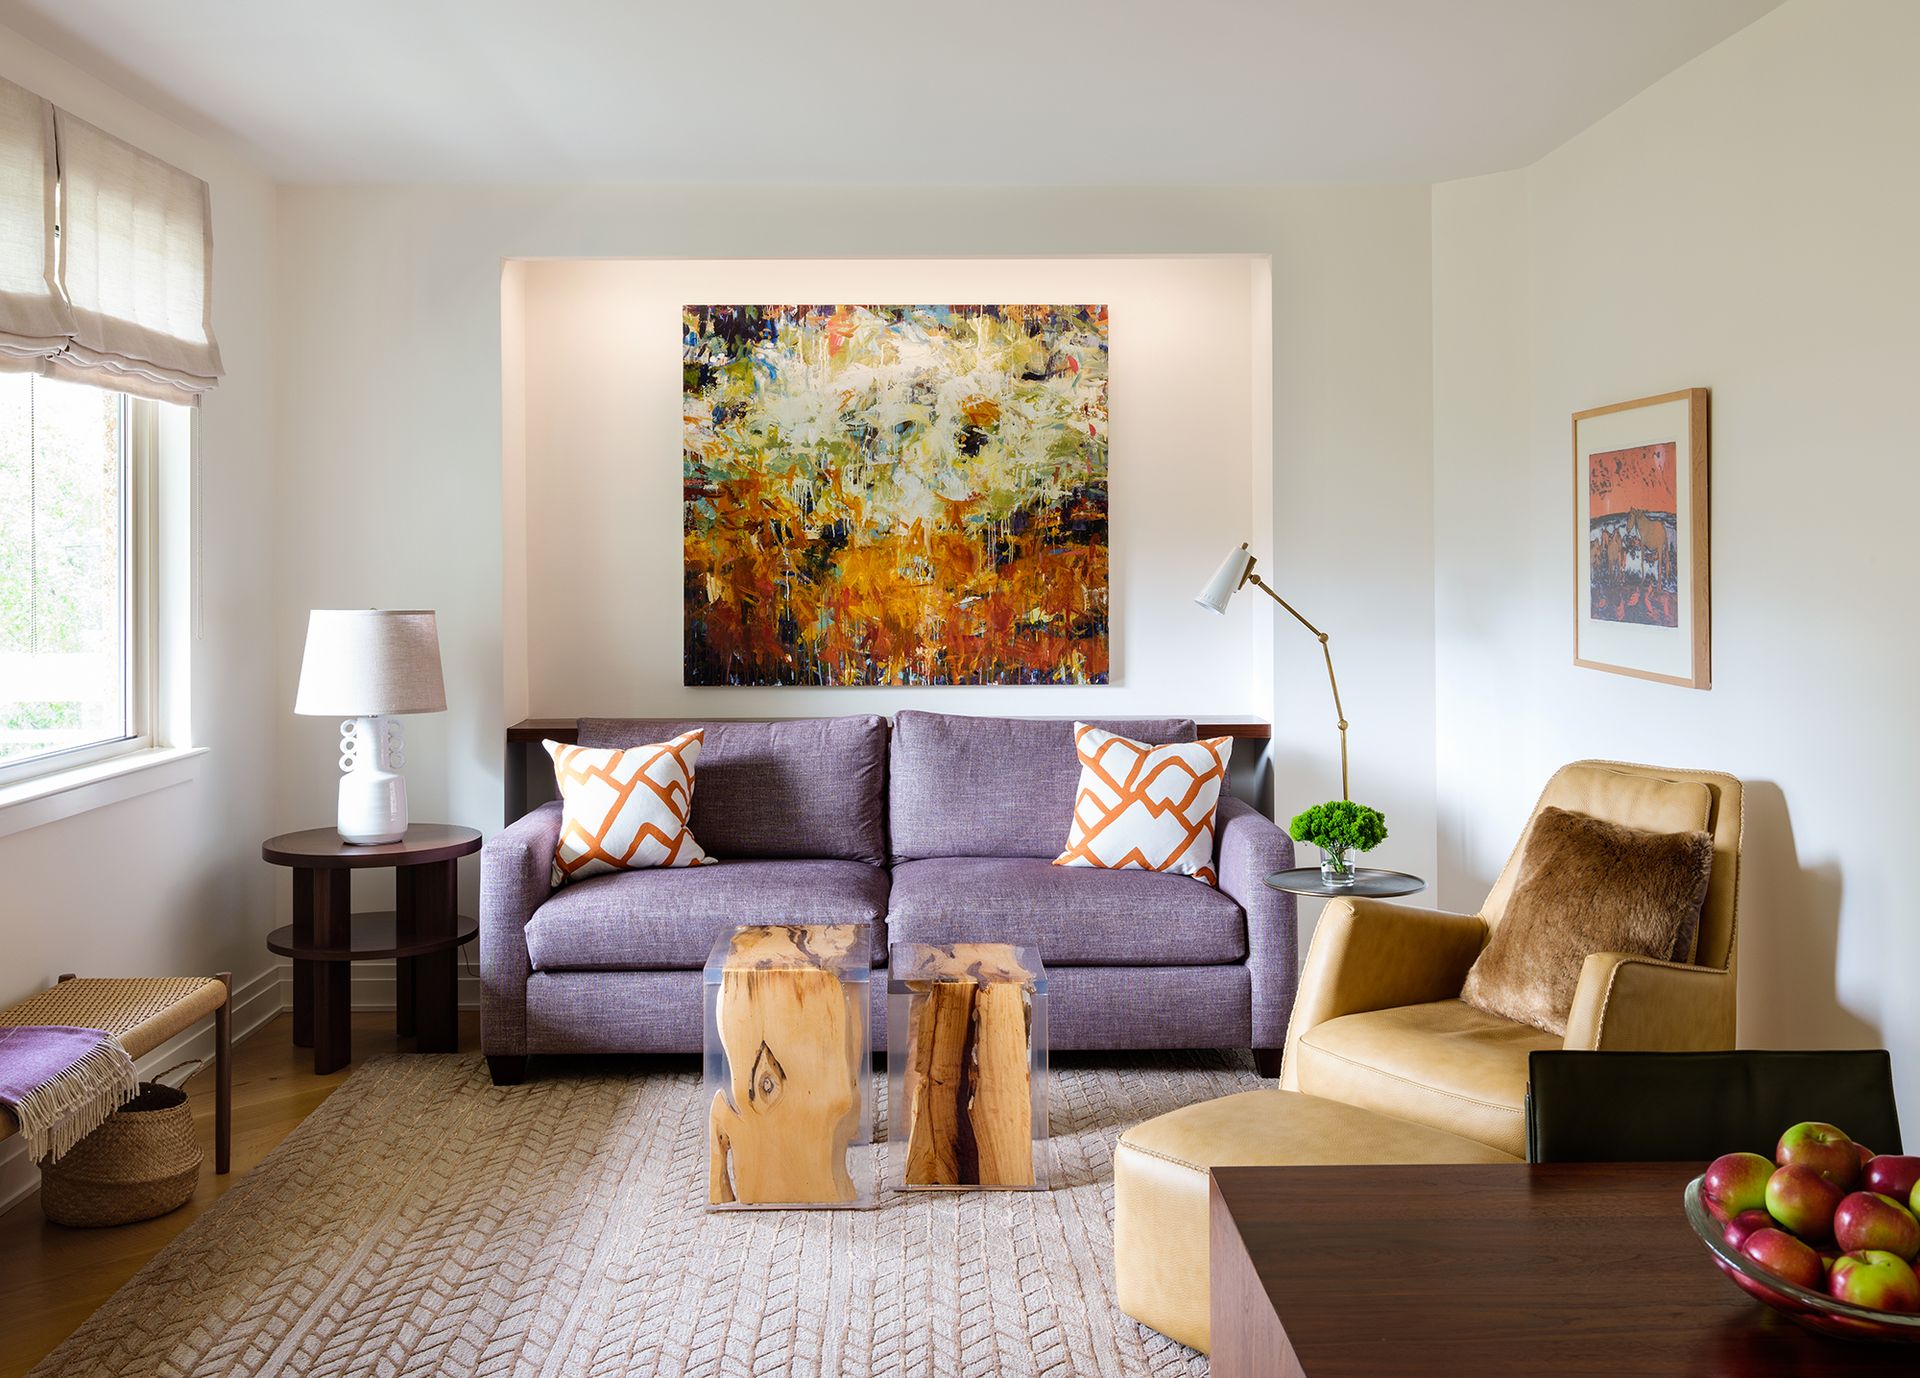 <p>                     Decorating with art will instantly elevate living room walls and is a brilliant way to create a focal point which will instantly draw your eye. When it comes to what type of art to choose think big says interior designer Annie Elliott.                   </p>                                      <p>                     'Most of us have artwork that's on the small side, but we need to think bigger! Pieces that are a minimum of 32 inches wide are always great to have,' says Annie Elliot. 'Over a fireplace, it's so much more appealing to hang a painting rather than a mirror or a TV. Over a sofa, one huge painting or a mixed media gallery wall can be show stopping.'                   </p>